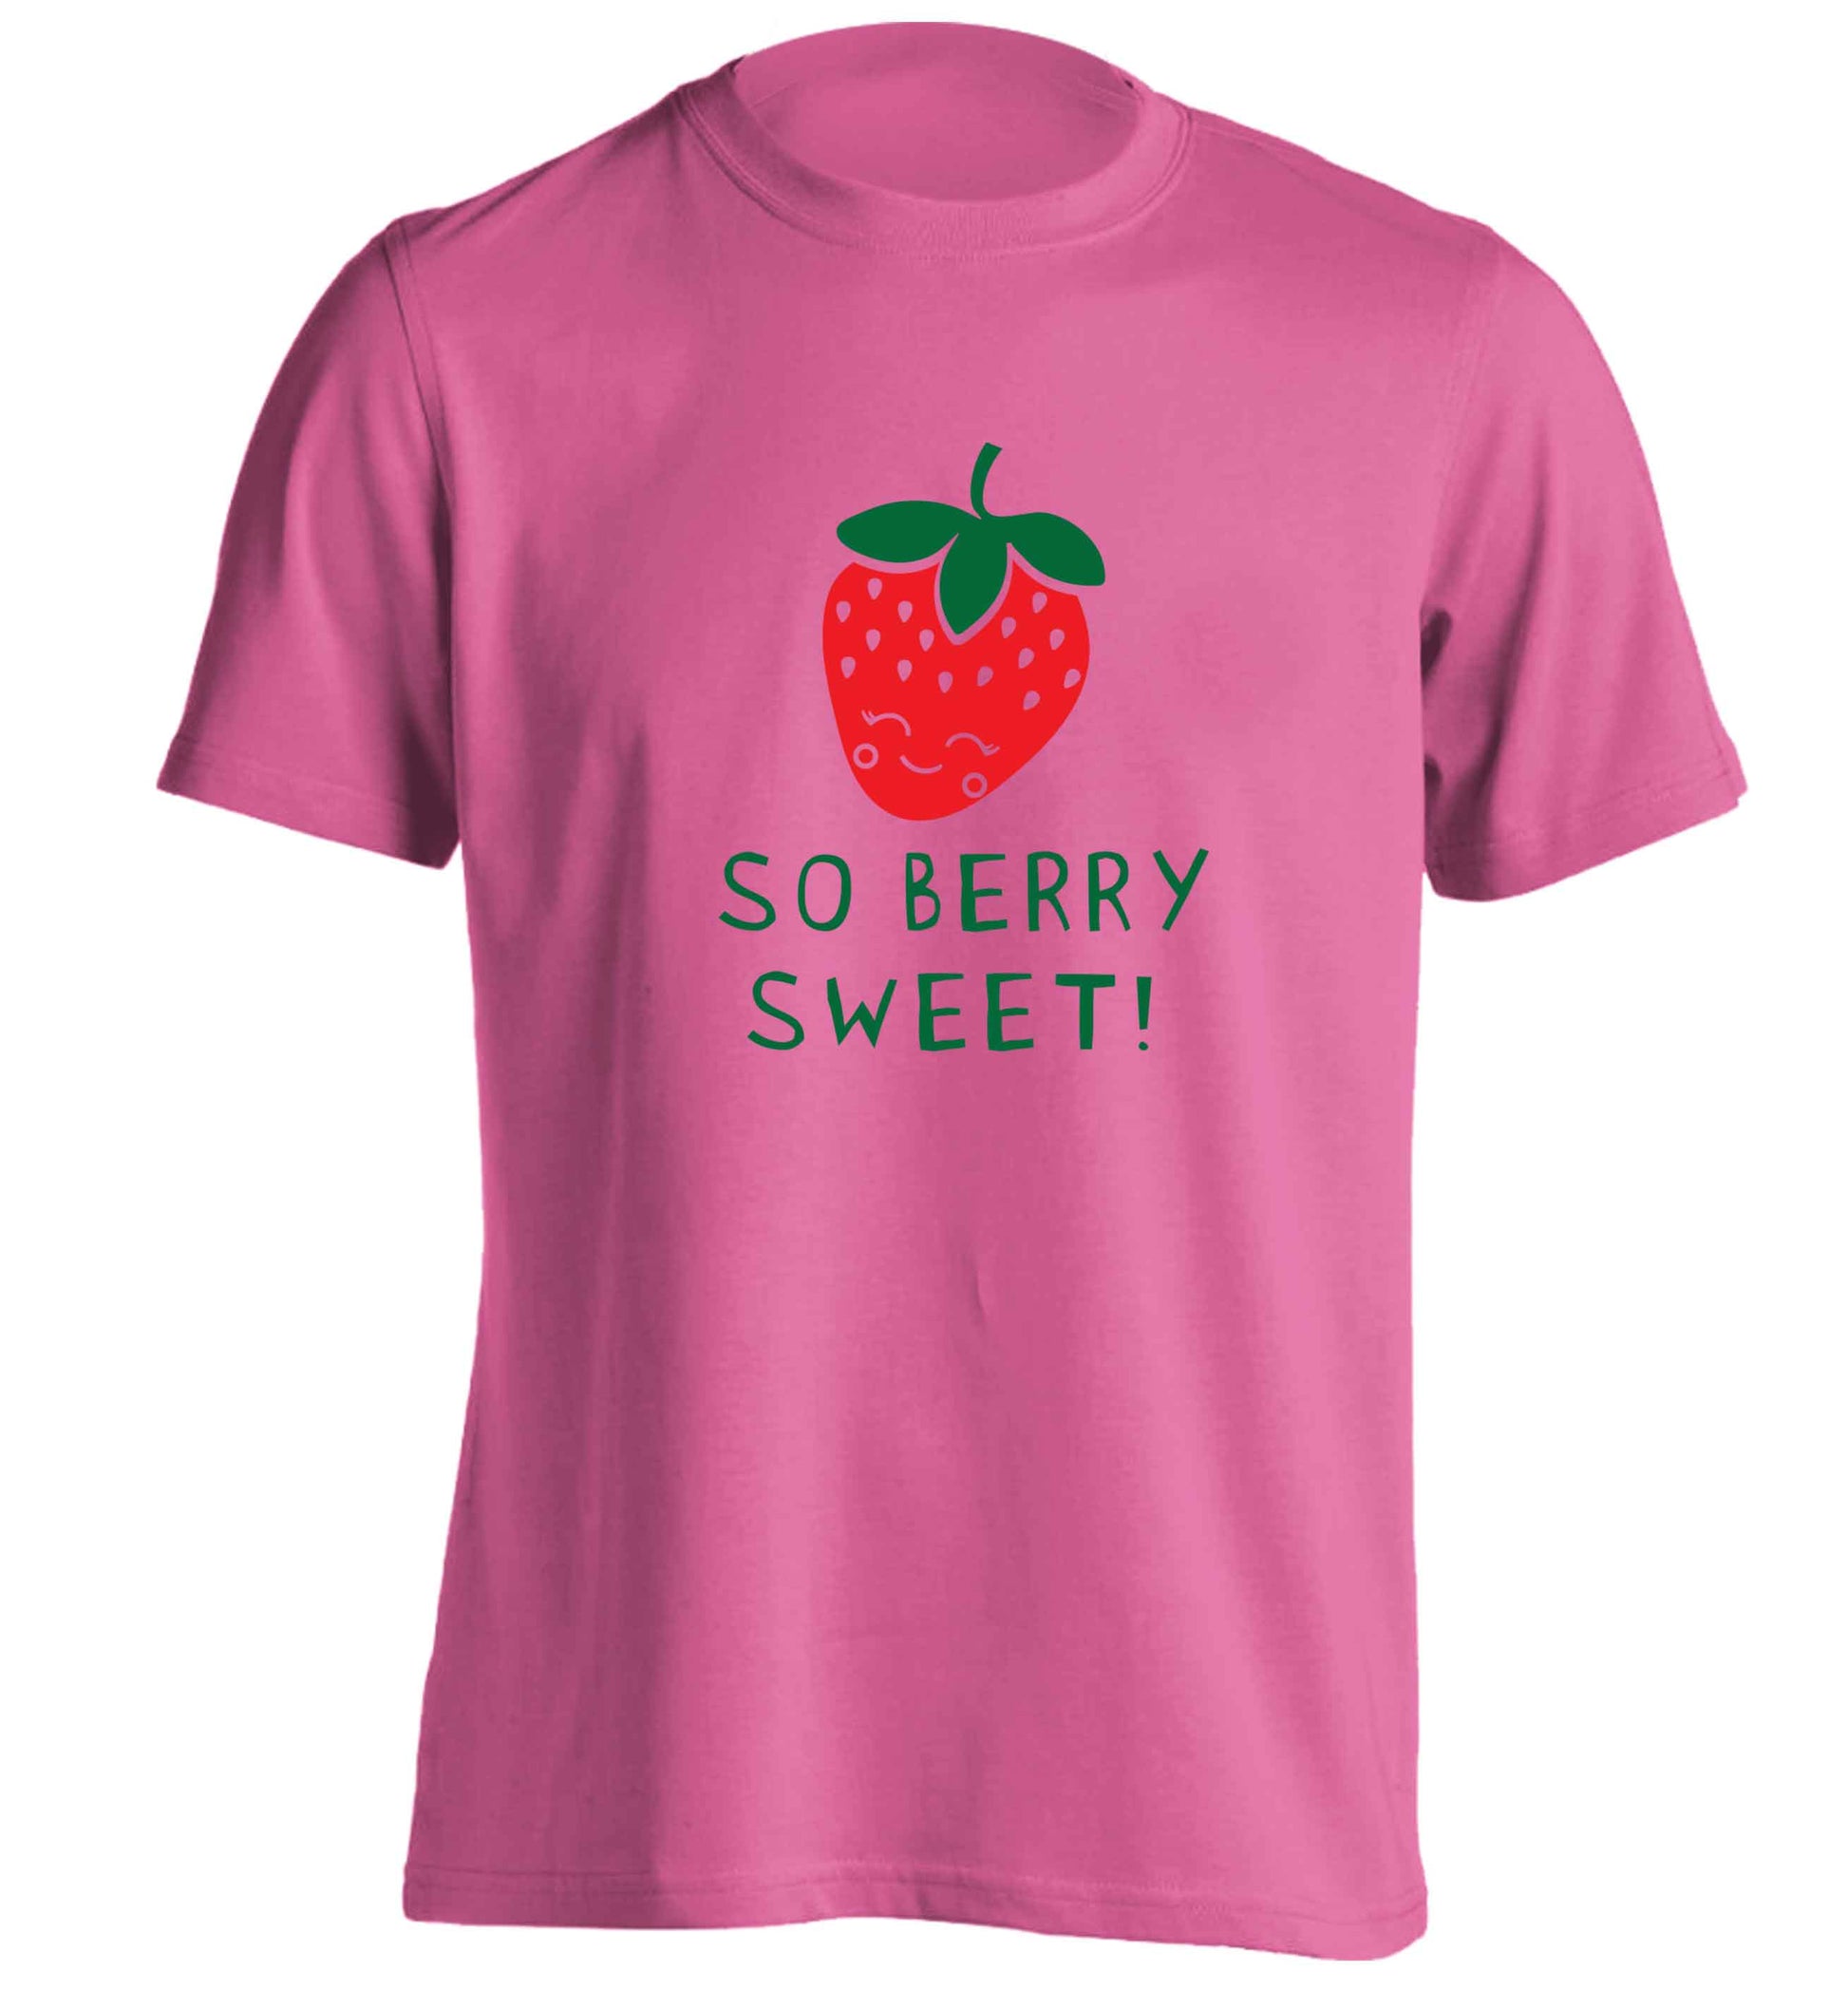 So berry sweet adults unisex pink Tshirt 2XL